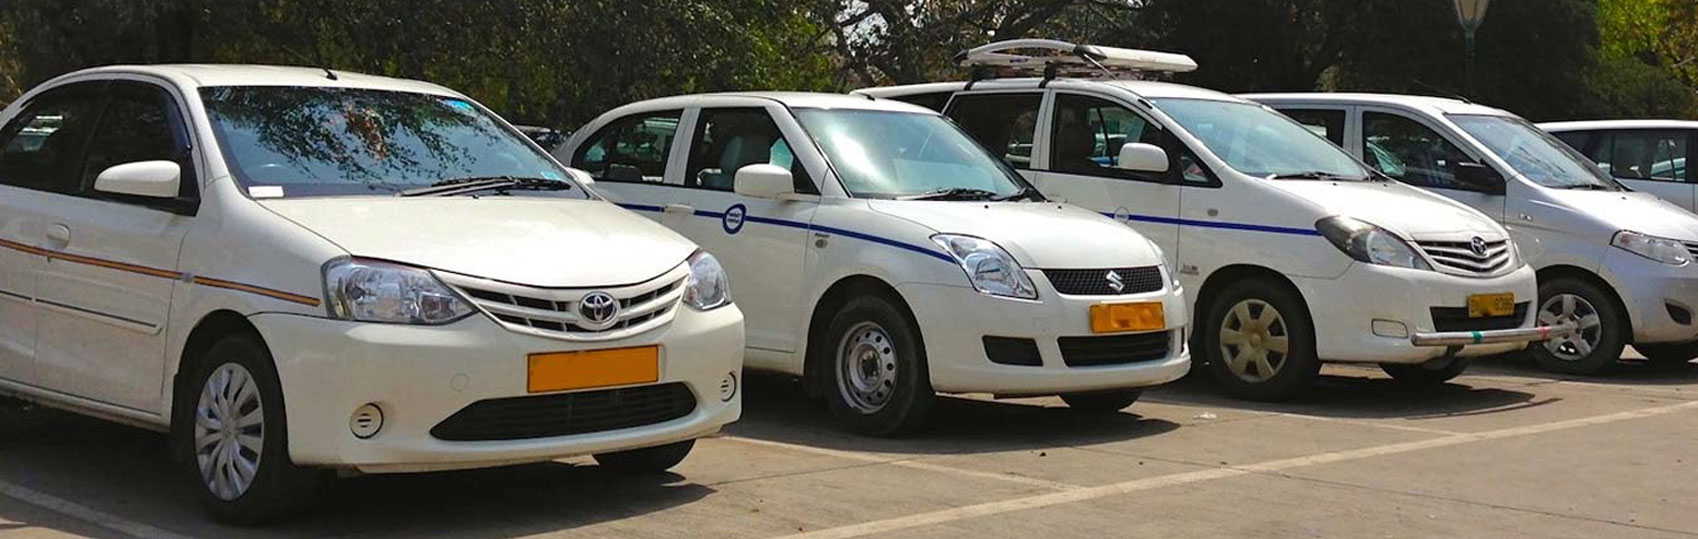 Taxi service in Gurgaon 